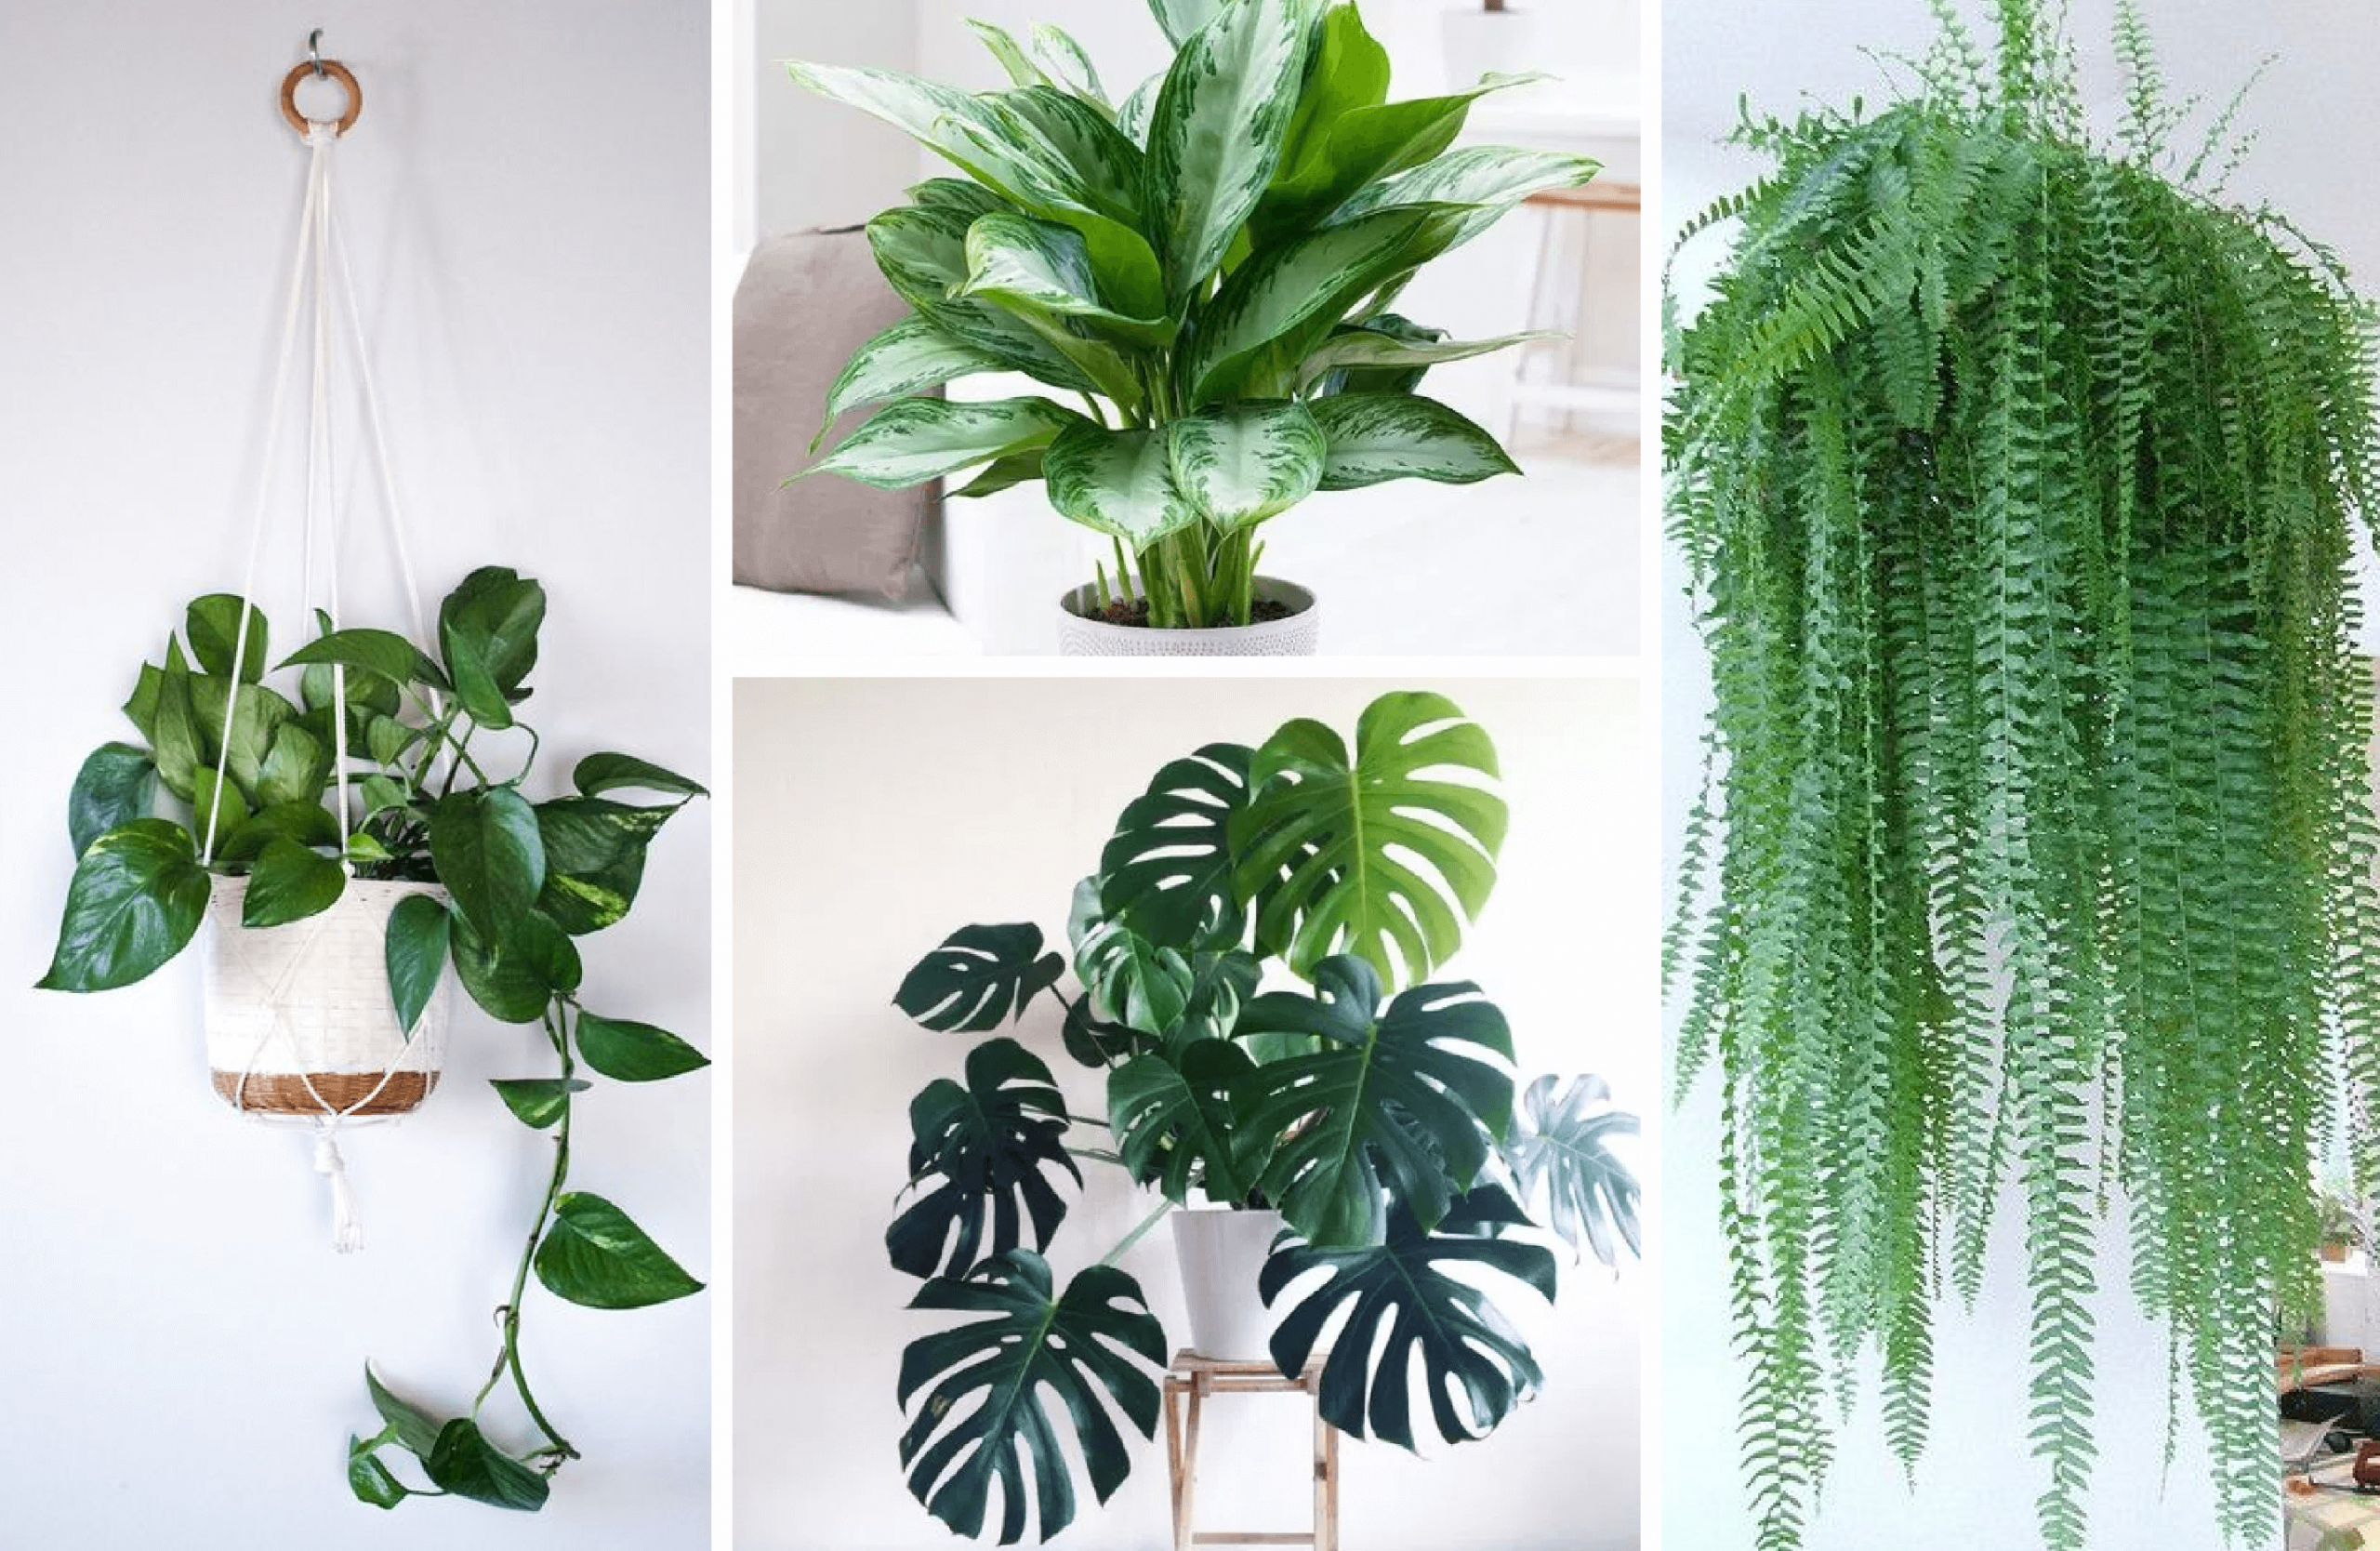 Bedroom Plants Low Light
 The Best Indoor Plants for Clean Air And Low Light